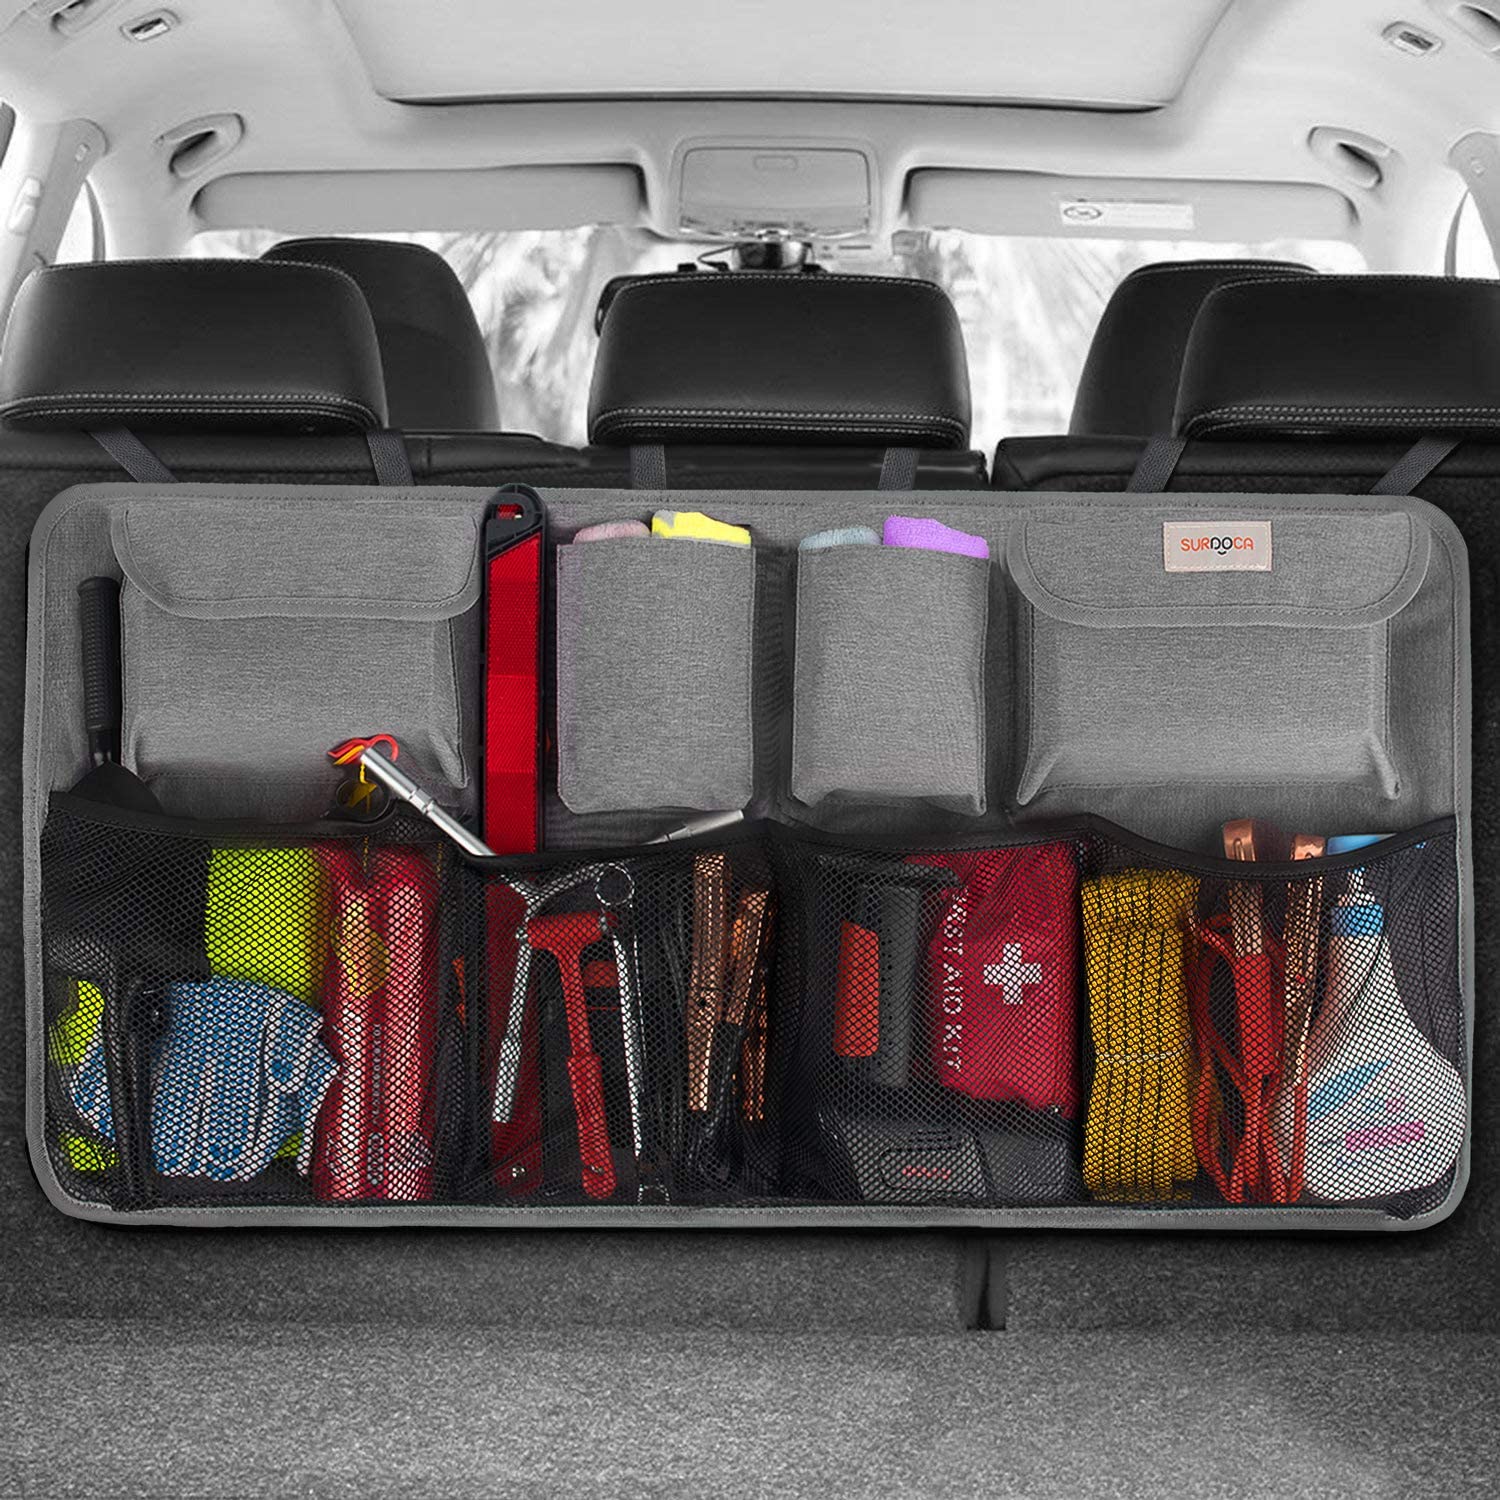 10 Best Car Organizers That Will Change Your Life